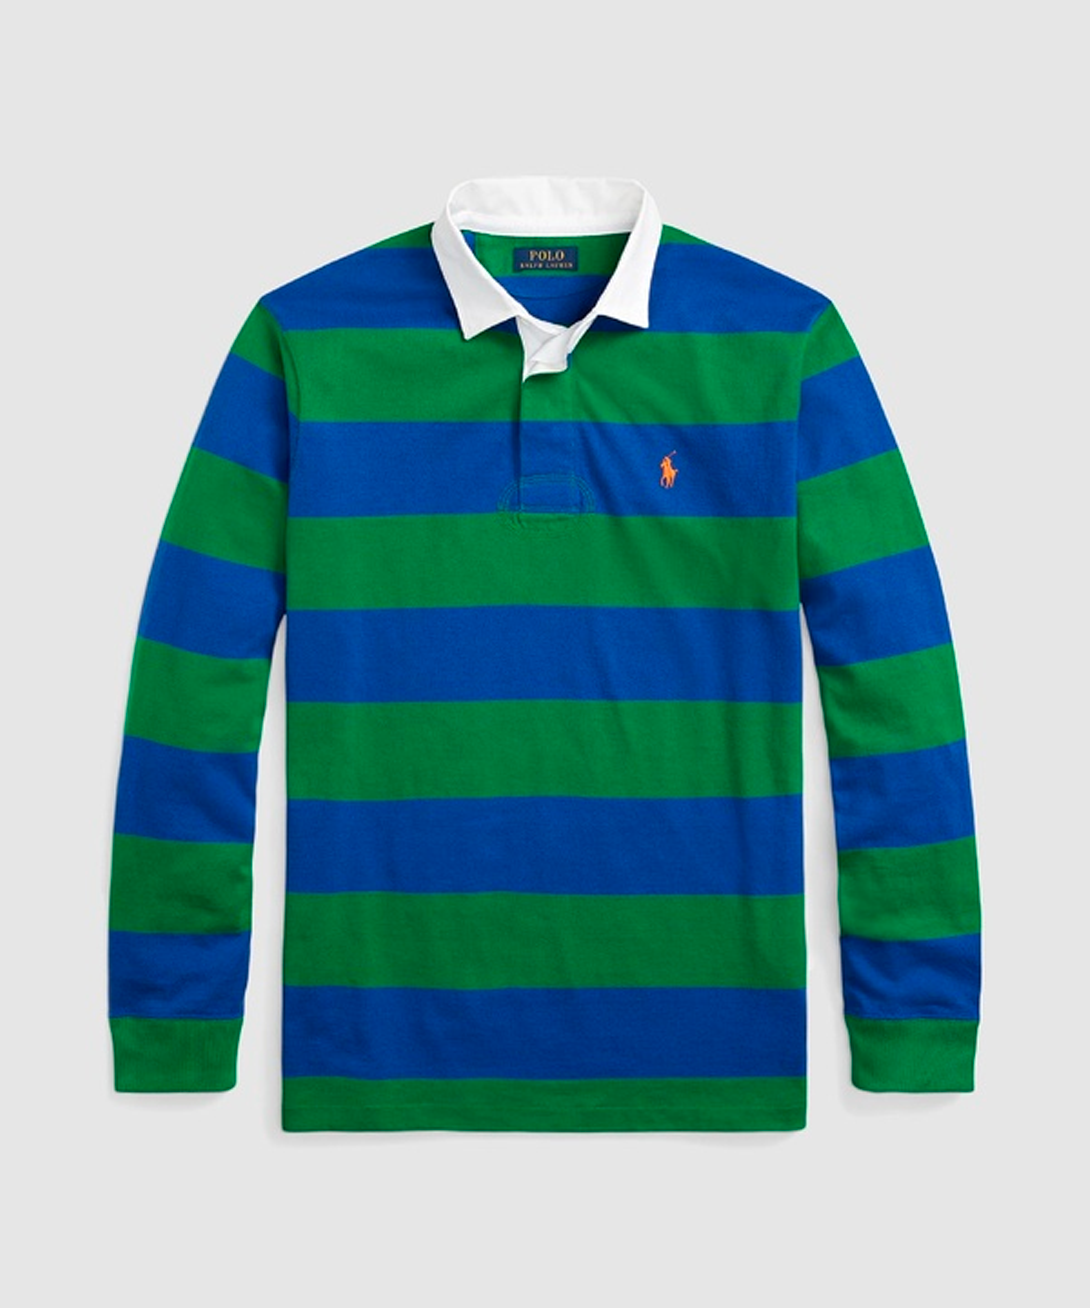 Polo Ralph Lauren + Classic Fit Striped Jersey Rugby Shirt